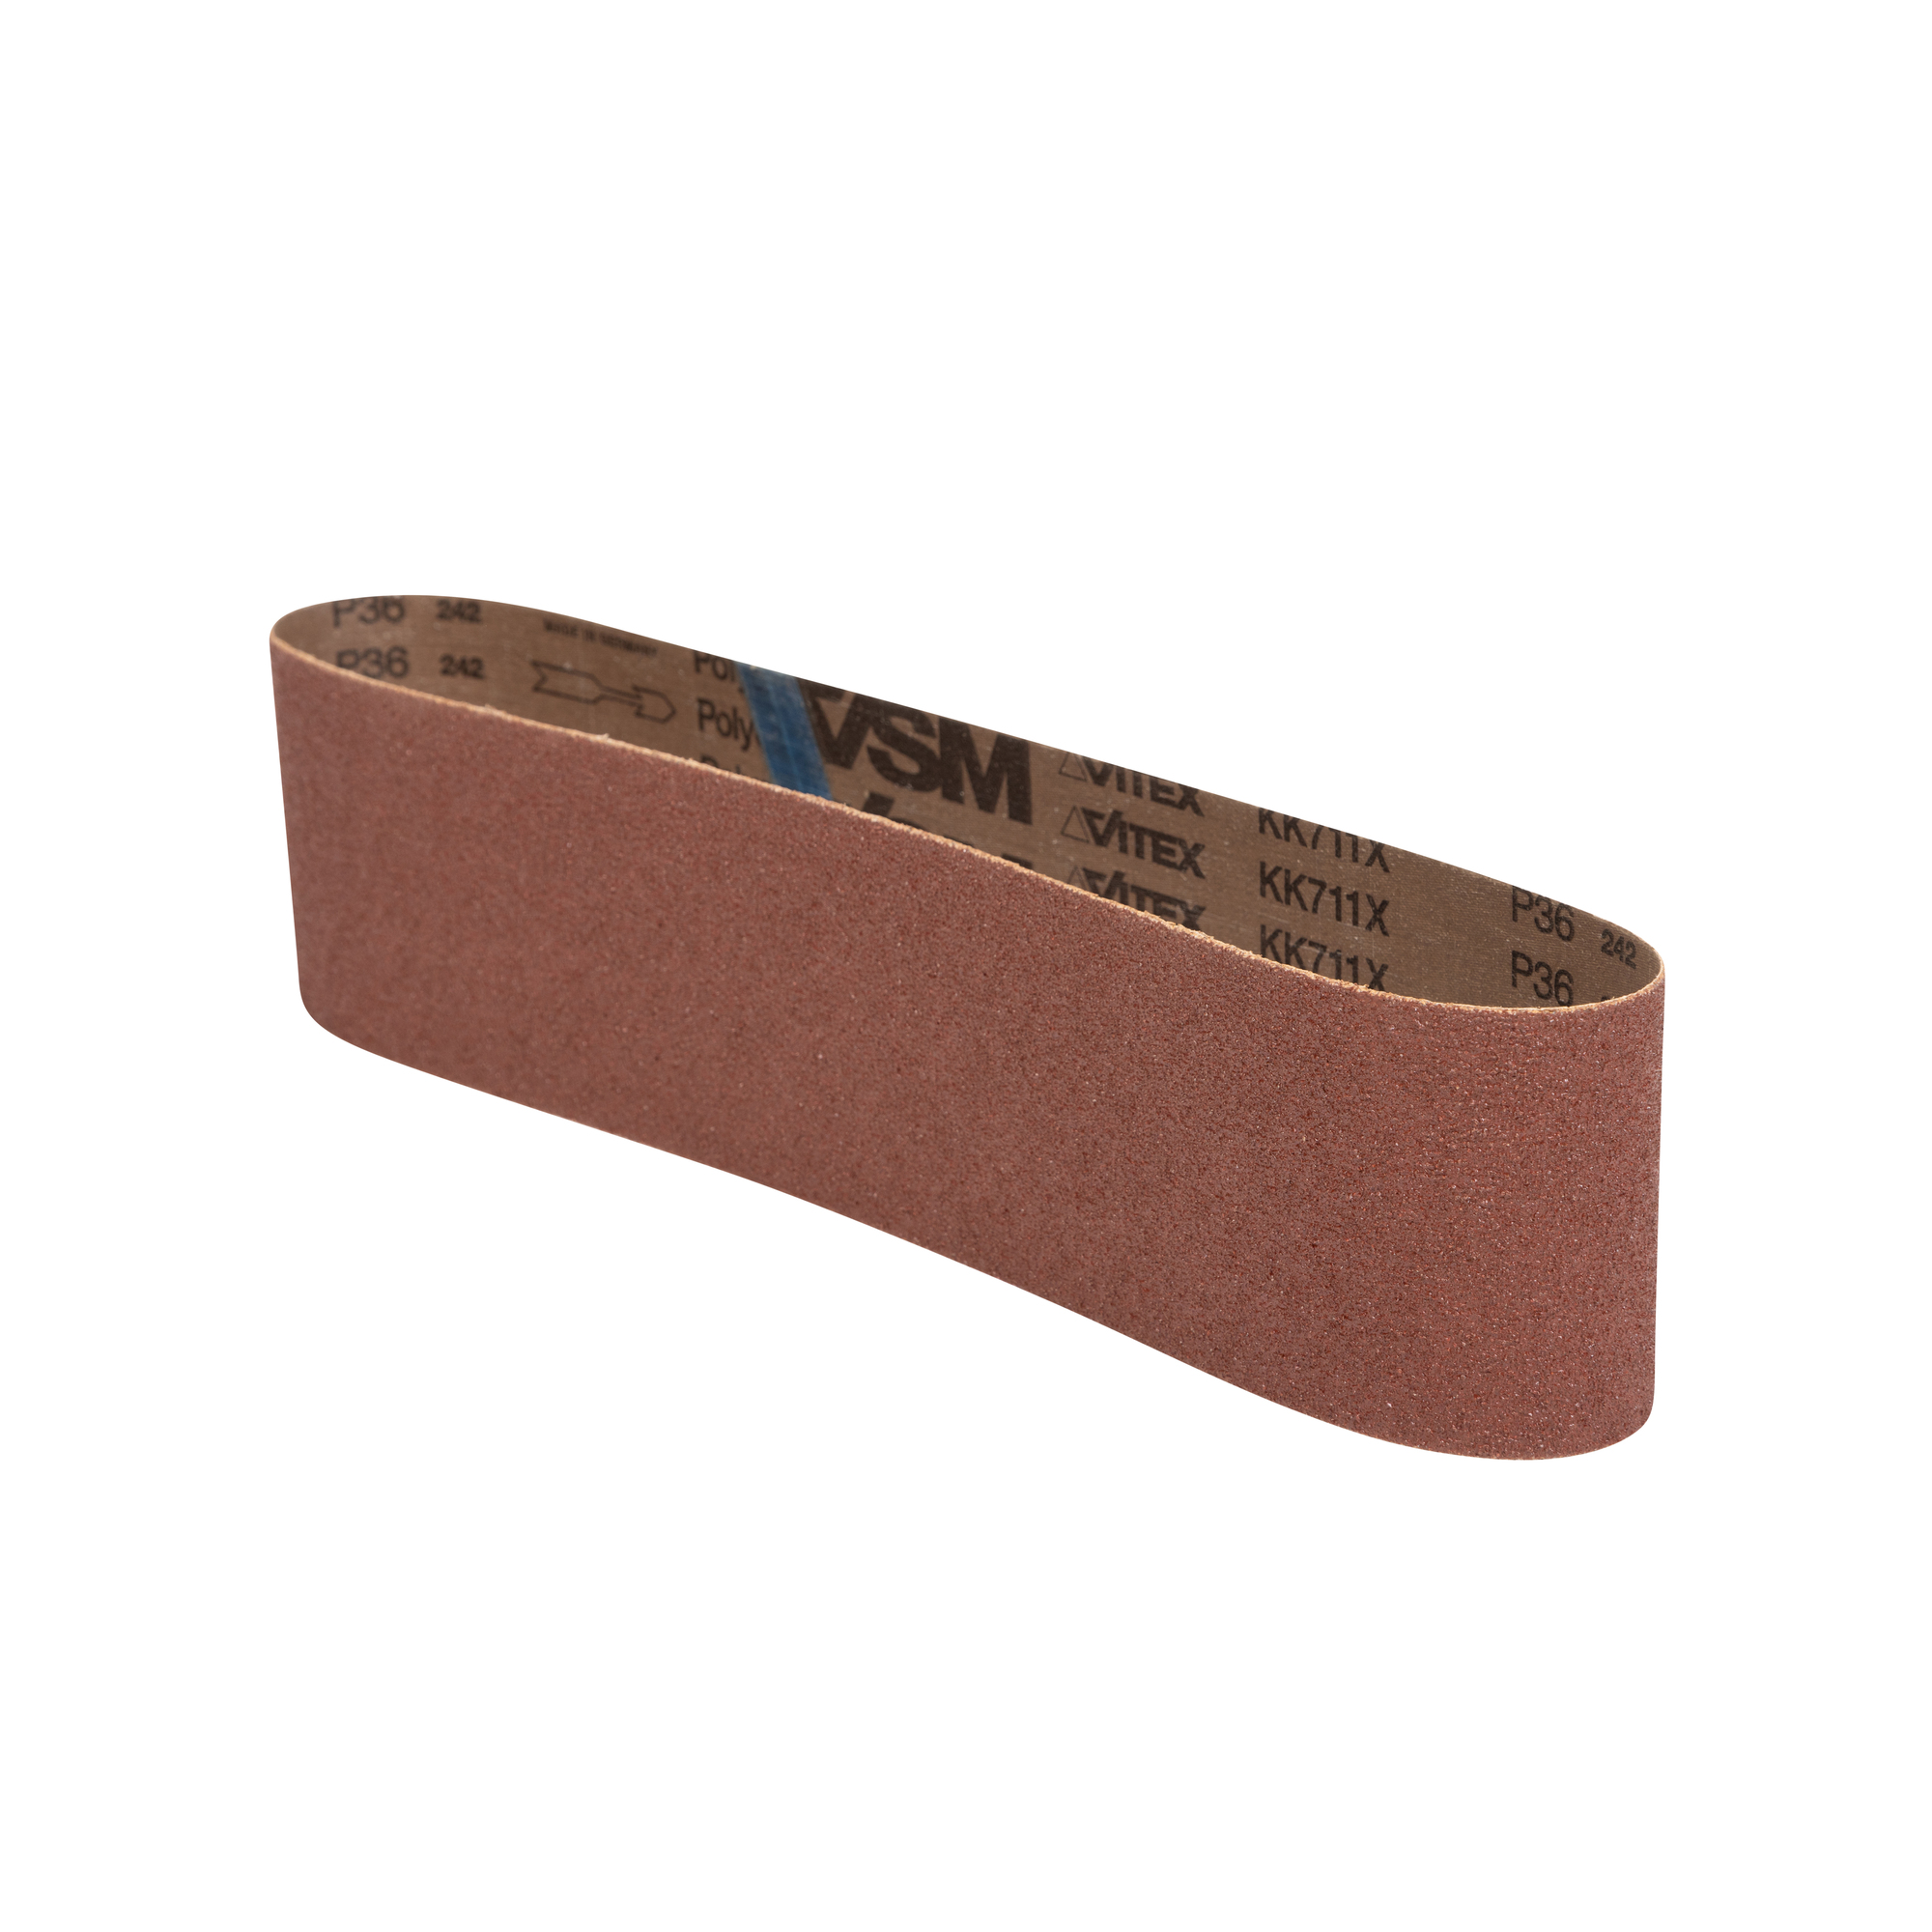 JET, Sand Paper, Pieces (qty.) 3 Grit 50 Length 36 in, Model 577532